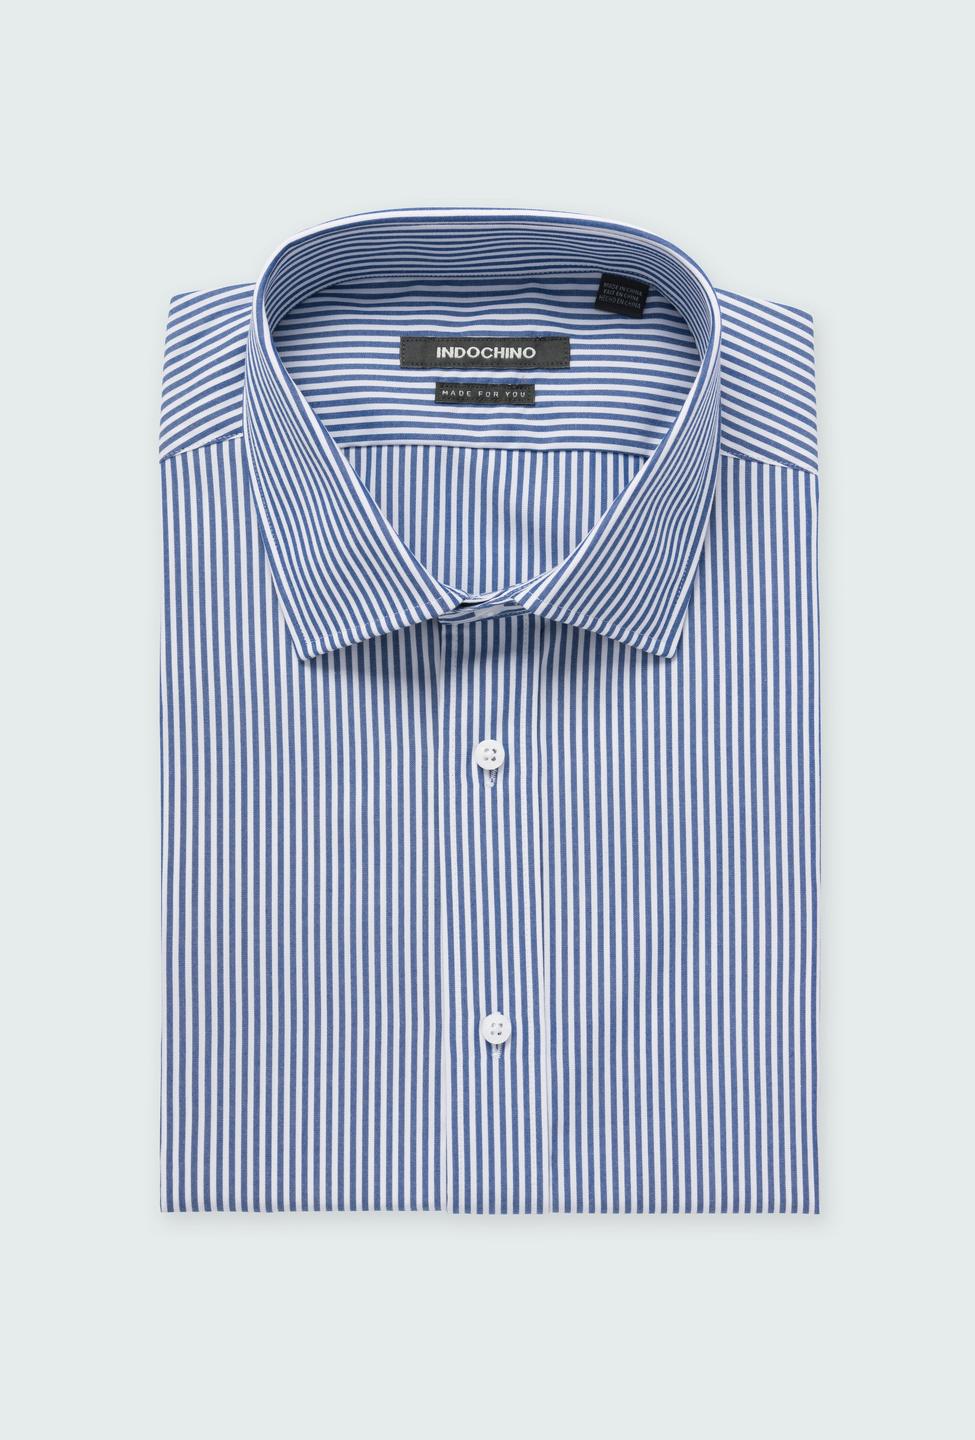 Blue shirt - Helston Striped Design from Premium Indochino Collection